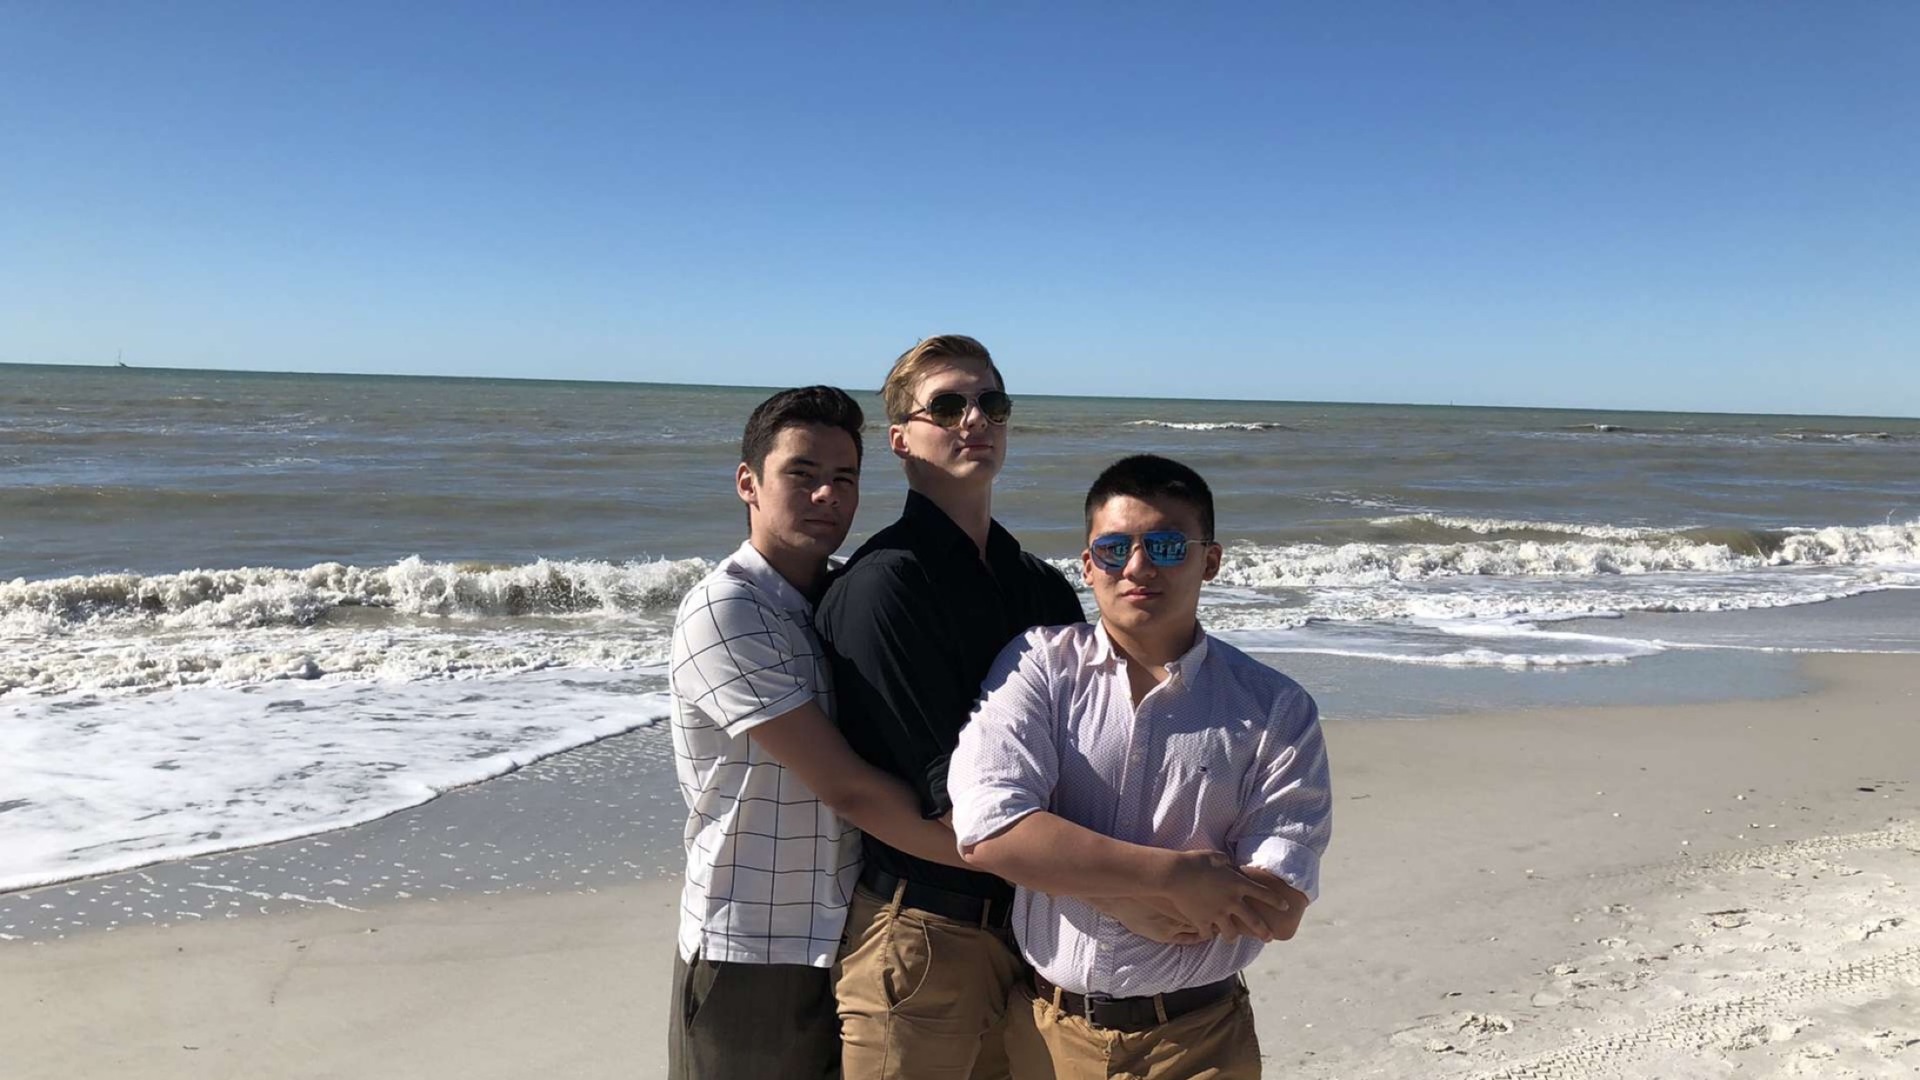 Me and my three friends all hug together in front of the beach